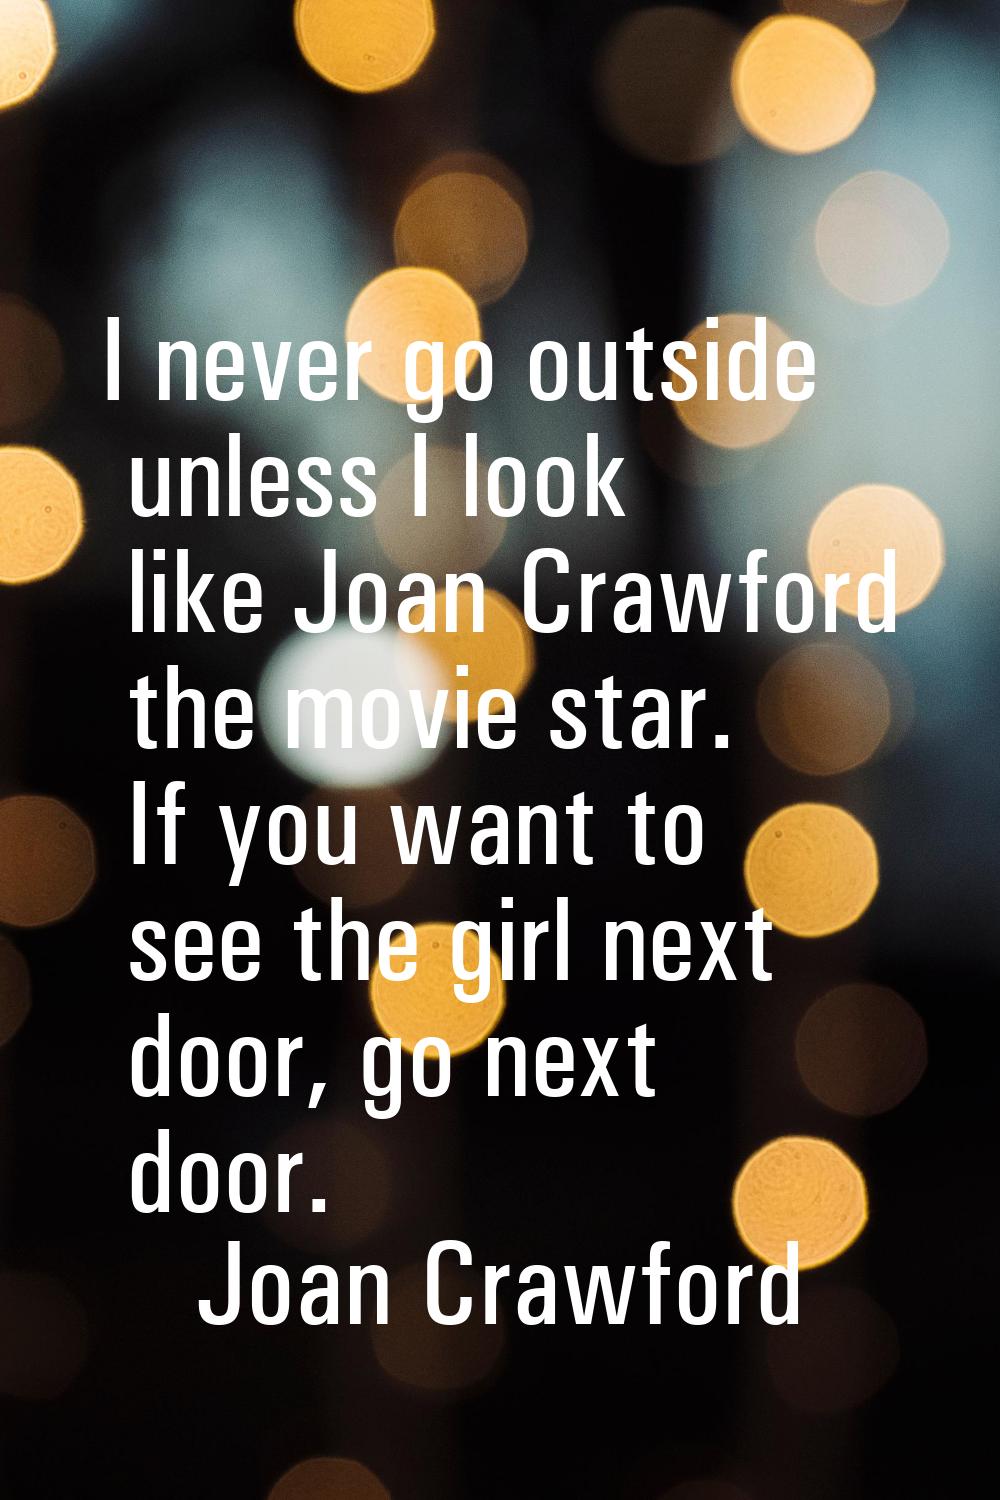 I never go outside unless I look like Joan Crawford the movie star. If you want to see the girl nex